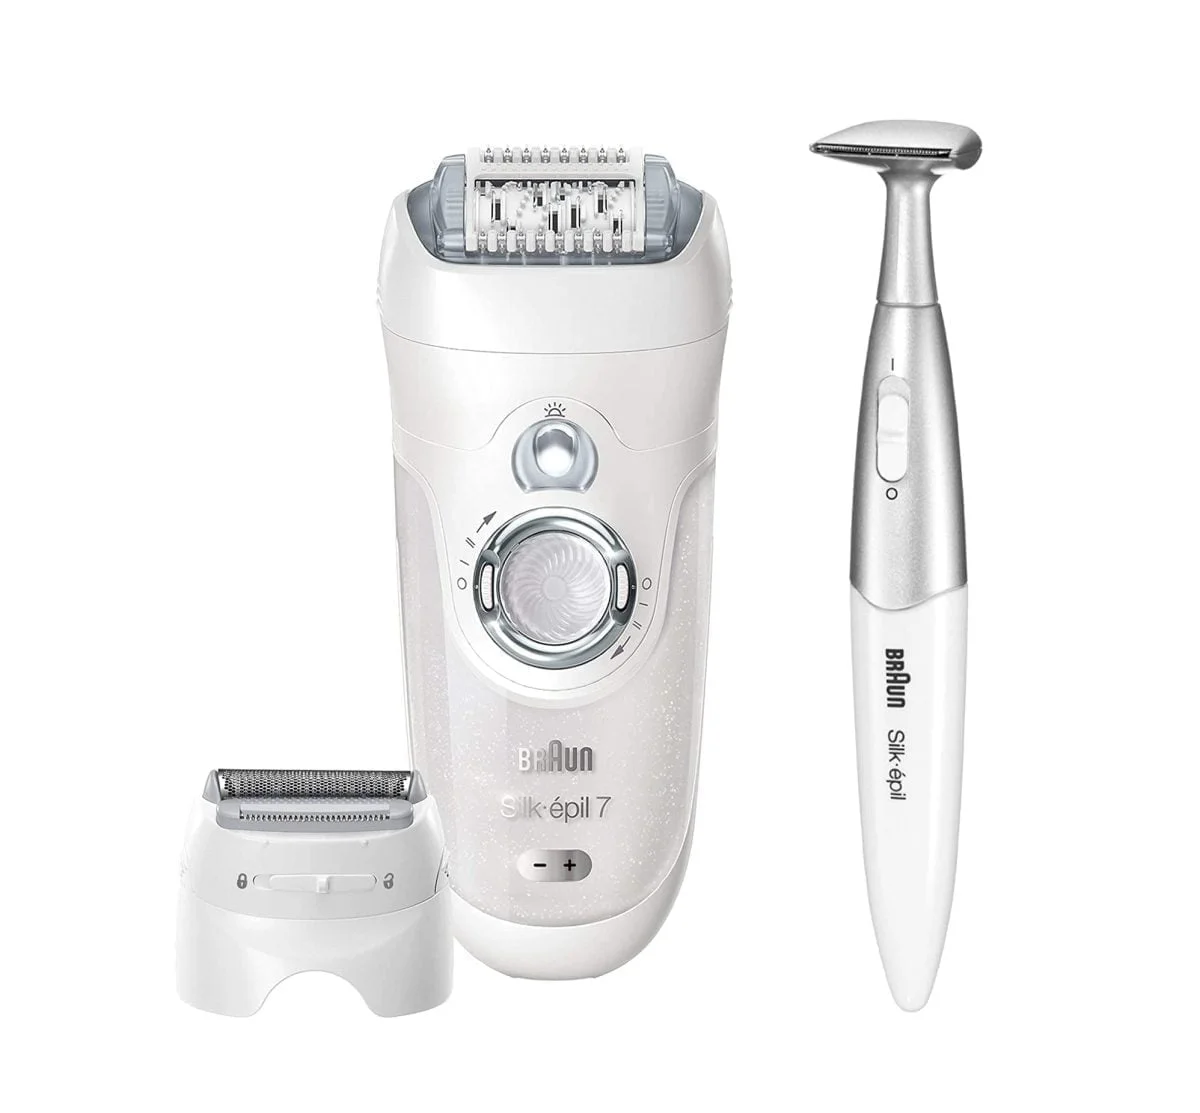 71Ys9Dns54L. Ac Sl1500 Braun &Amp;Lt;H1&Amp;Gt;Braun Silk Epil 7 7-561 - Wet &Amp;Amp; Dry Cordless Epilator With 8 Extras Including Free Braun Fg1100 Silk Epil Beauty Styler, Bikini Styler&Amp;Lt;/H1&Amp;Gt; Https://Www.youtube.com/Watch?V=Rt1Dituw3Iu &Amp;Lt;Ul Class=&Amp;Quot;A-Unordered-List A-Vertical A-Spacing-Mini&Amp;Quot;&Amp;Gt; &Amp;Lt;Li&Amp;Gt;&Amp;Lt;Span Class=&Amp;Quot;A-List-Item&Amp;Quot;&Amp;Gt; Micro-Grip Technology &Amp;Lt;/Span&Amp;Gt;&Amp;Lt;/Li&Amp;Gt; &Amp;Lt;Li&Amp;Gt;&Amp;Lt;Span Class=&Amp;Quot;A-List-Item&Amp;Quot;&Amp;Gt; High Frequency Massage System &Amp;Lt;/Span&Amp;Gt;&Amp;Lt;/Li&Amp;Gt; &Amp;Lt;Li&Amp;Gt;&Amp;Lt;Span Class=&Amp;Quot;A-List-Item&Amp;Quot;&Amp;Gt; Works In Bath Or Shower For A More Comfortable Epilation &Amp;Lt;/Span&Amp;Gt;&Amp;Lt;/Li&Amp;Gt; &Amp;Lt;Li&Amp;Gt;&Amp;Lt;Span Class=&Amp;Quot;A-List-Item&Amp;Quot;&Amp;Gt; The Smartlight Reveals Even The Finest Hairs And Supports Extra Thorough Hair Removal &Amp;Lt;/Span&Amp;Gt;&Amp;Lt;/Li&Amp;Gt; &Amp;Lt;Li&Amp;Gt;&Amp;Lt;Span Class=&Amp;Quot;A-List-Item&Amp;Quot;&Amp;Gt; Charges In Only 1 Hour For 40 Minutes Of Use. Use Cordless In Shower Or Bath &Amp;Lt;/Span&Amp;Gt;&Amp;Lt;/Li&Amp;Gt; &Amp;Lt;/Ul&Amp;Gt; Braun Braun Silk Epil 7 7-561 - Wet &Amp;Amp; Dry Cordless Epilator With 8 Extras Including Free Braun Fg1100 Silk Epil Beauty Styler, Bikini Styler